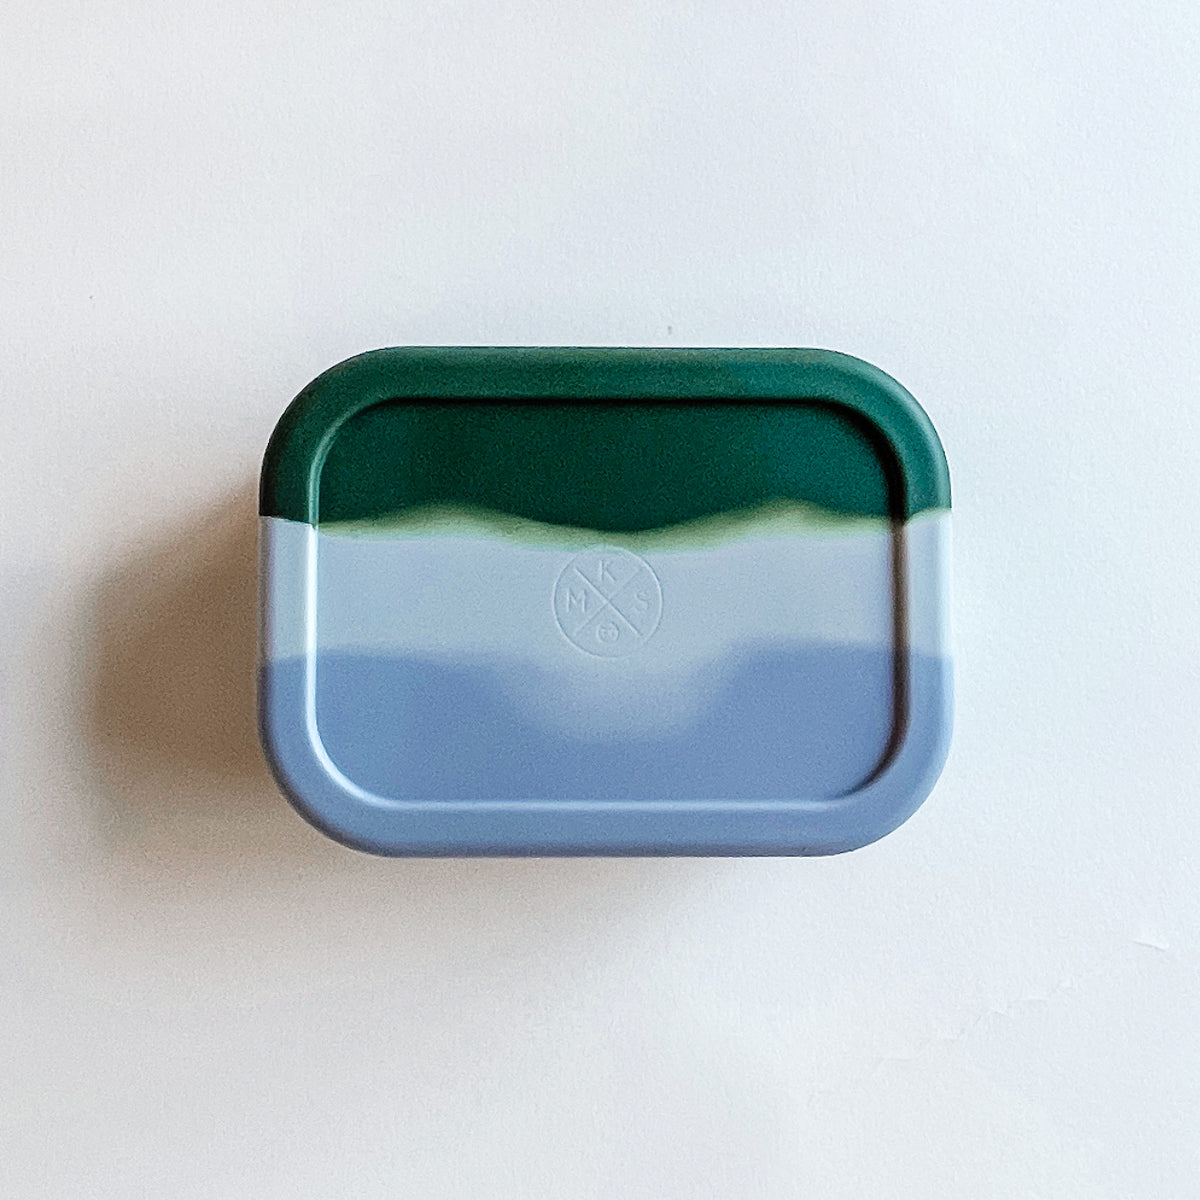 Durable silicone bpa free lunch bento box for kids and adults by MKS Miminoo Gilbert Arizona USA marble effect flagstaff green and grey for boys and girls lunch on the go